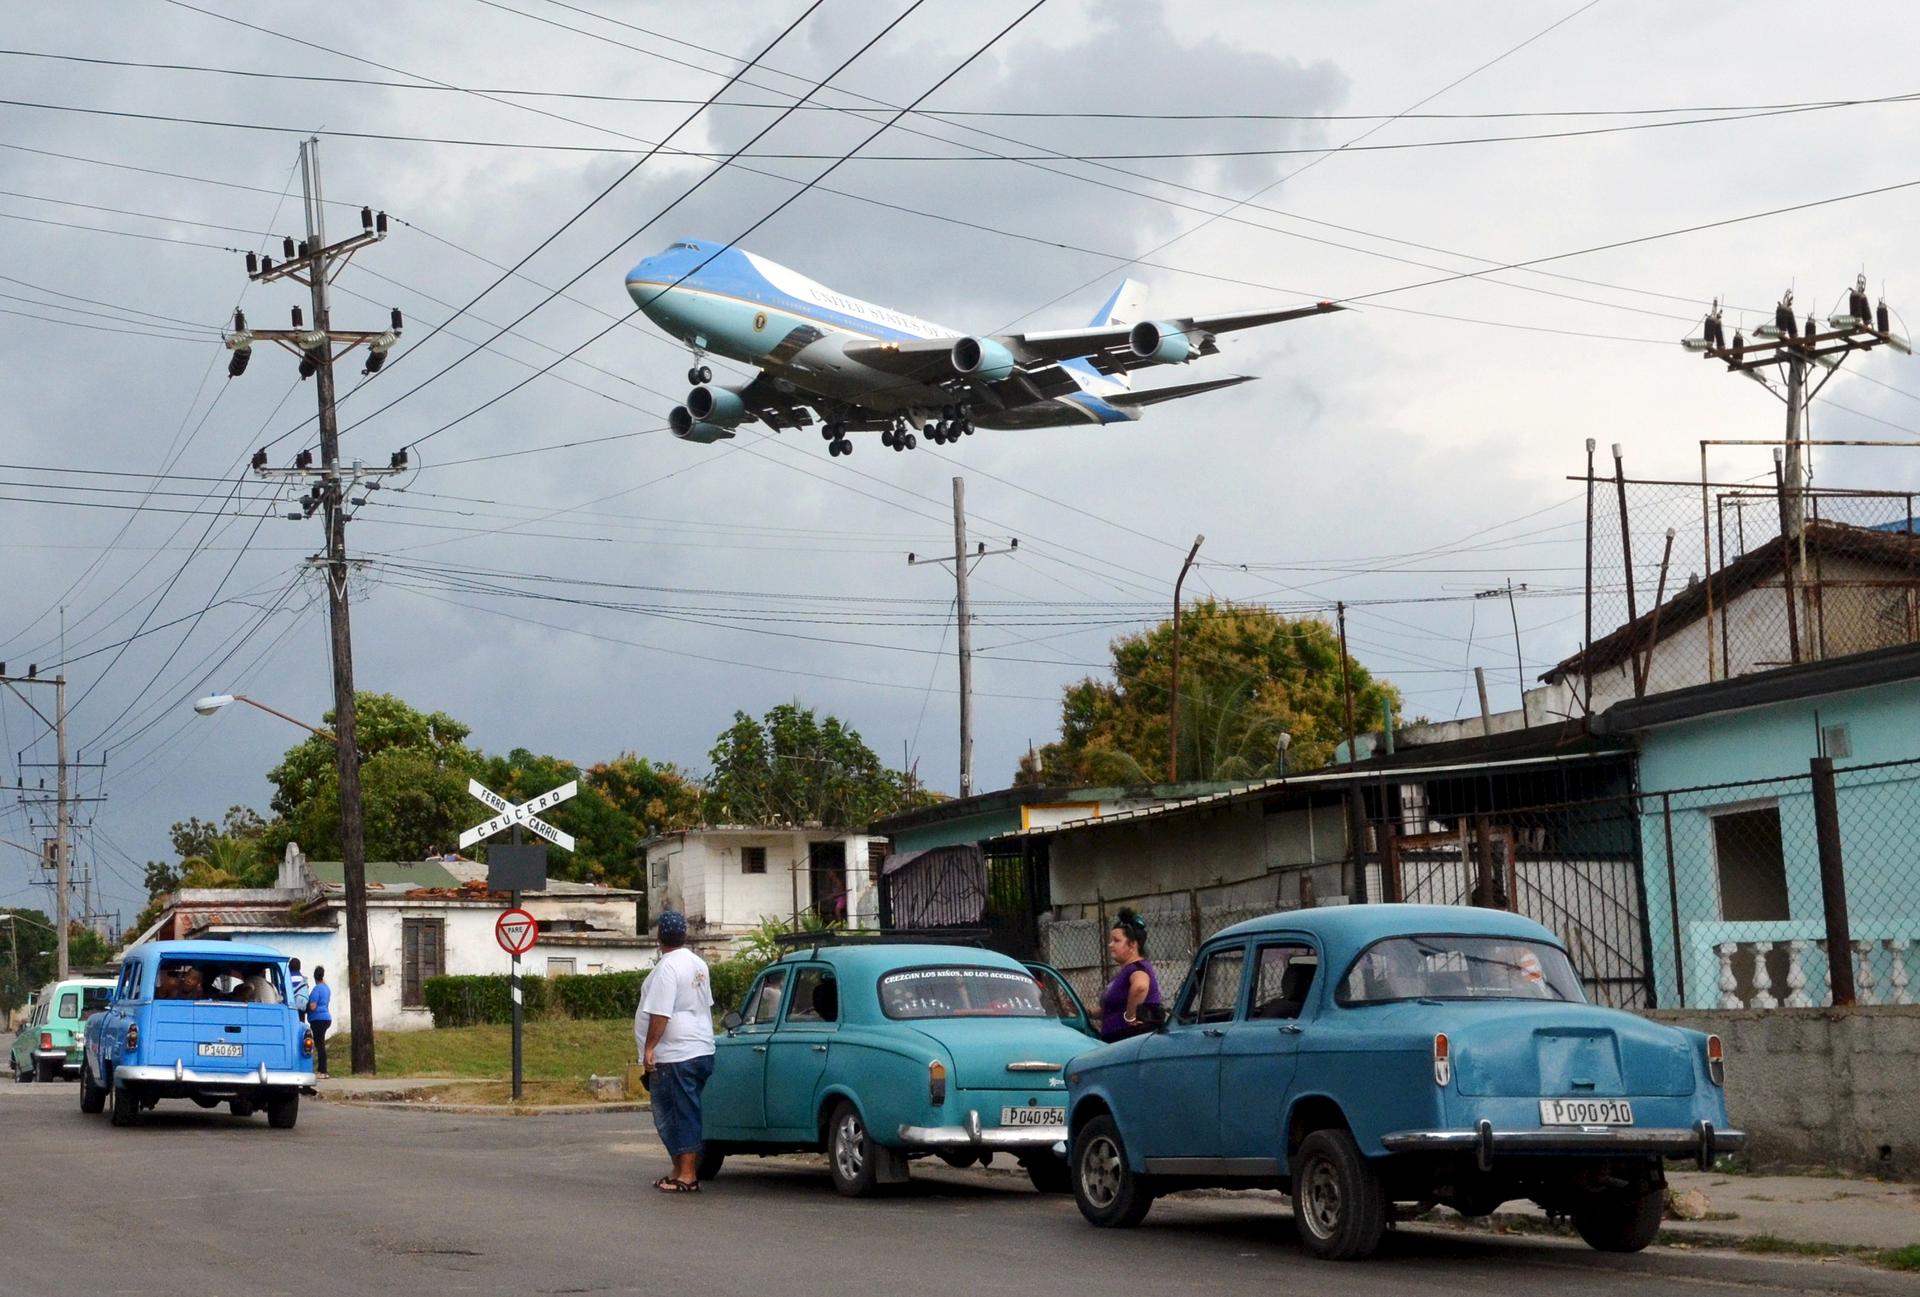 Air Force One carrying US President Barack Obama and his family flies over a neighborhood of Havana as it approaches the runway to land at Havana's international airport, March 20, 2016.